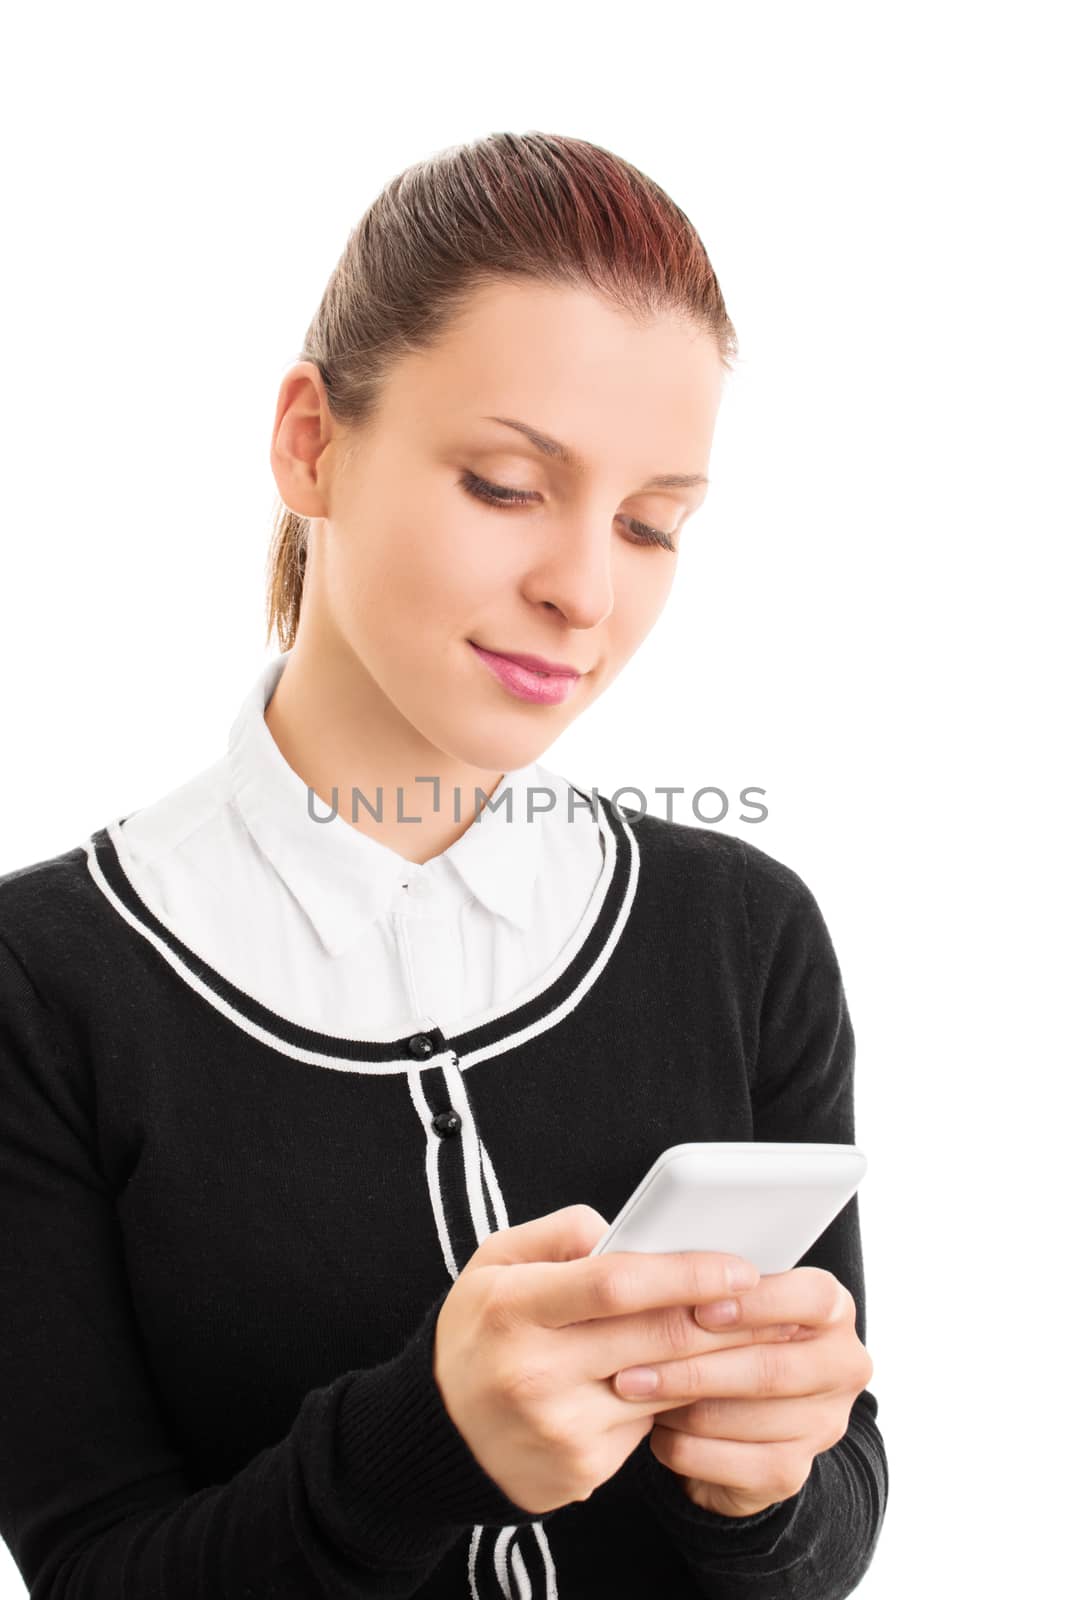 Checking phone. Close up of a young student girl looking at her phone, isolated on white background.